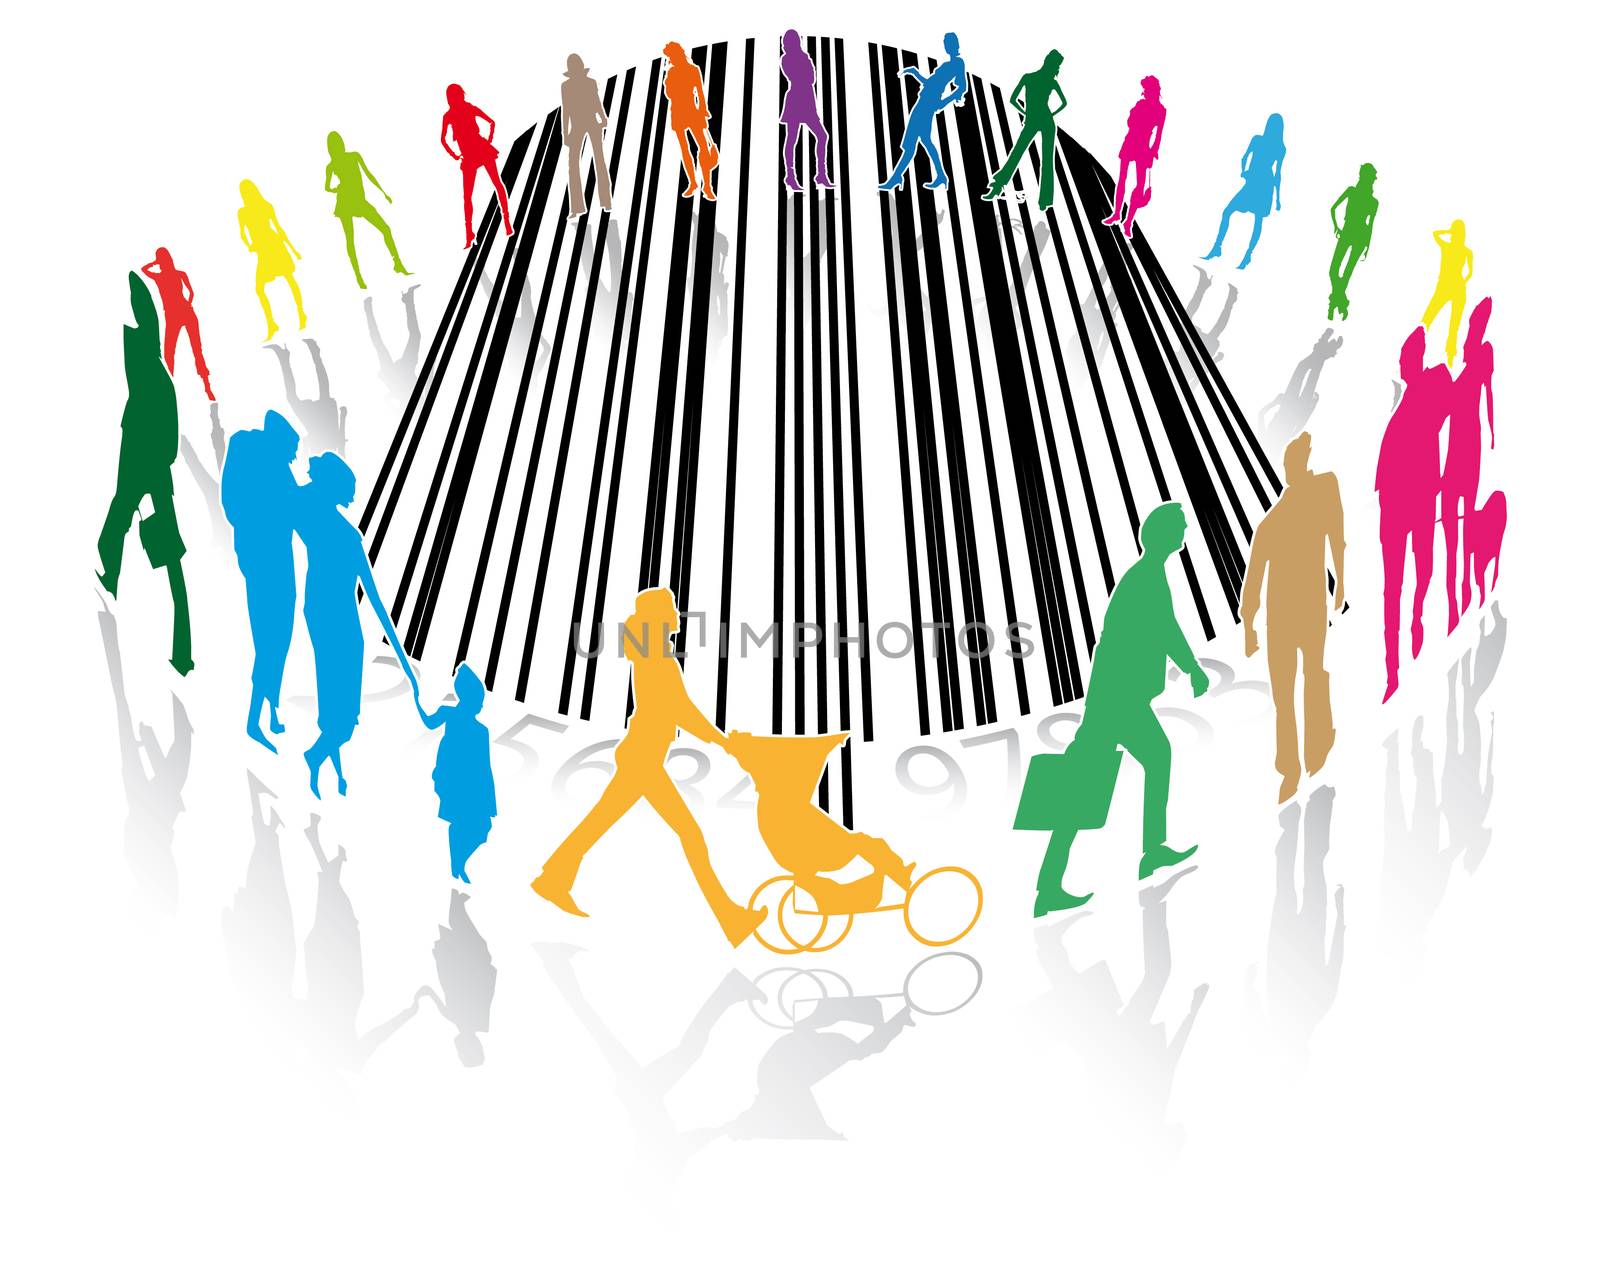 pedestrians or customers of a supermarket on a barcode